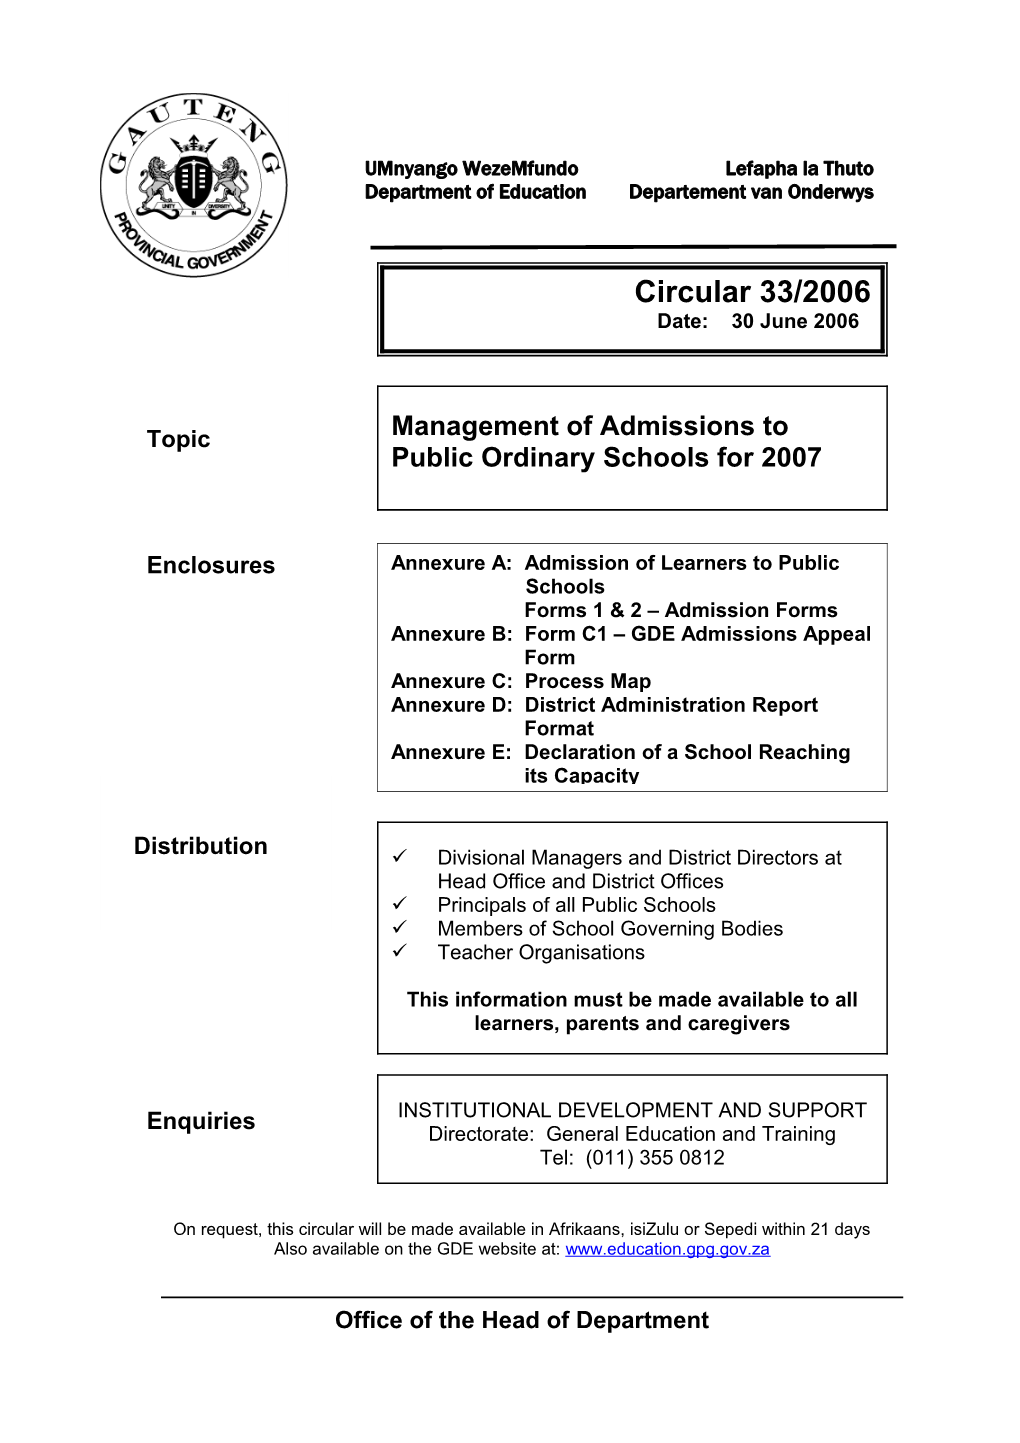 Circ.33.2006 Management of Admissions to Public Ordinary Schools for 2007